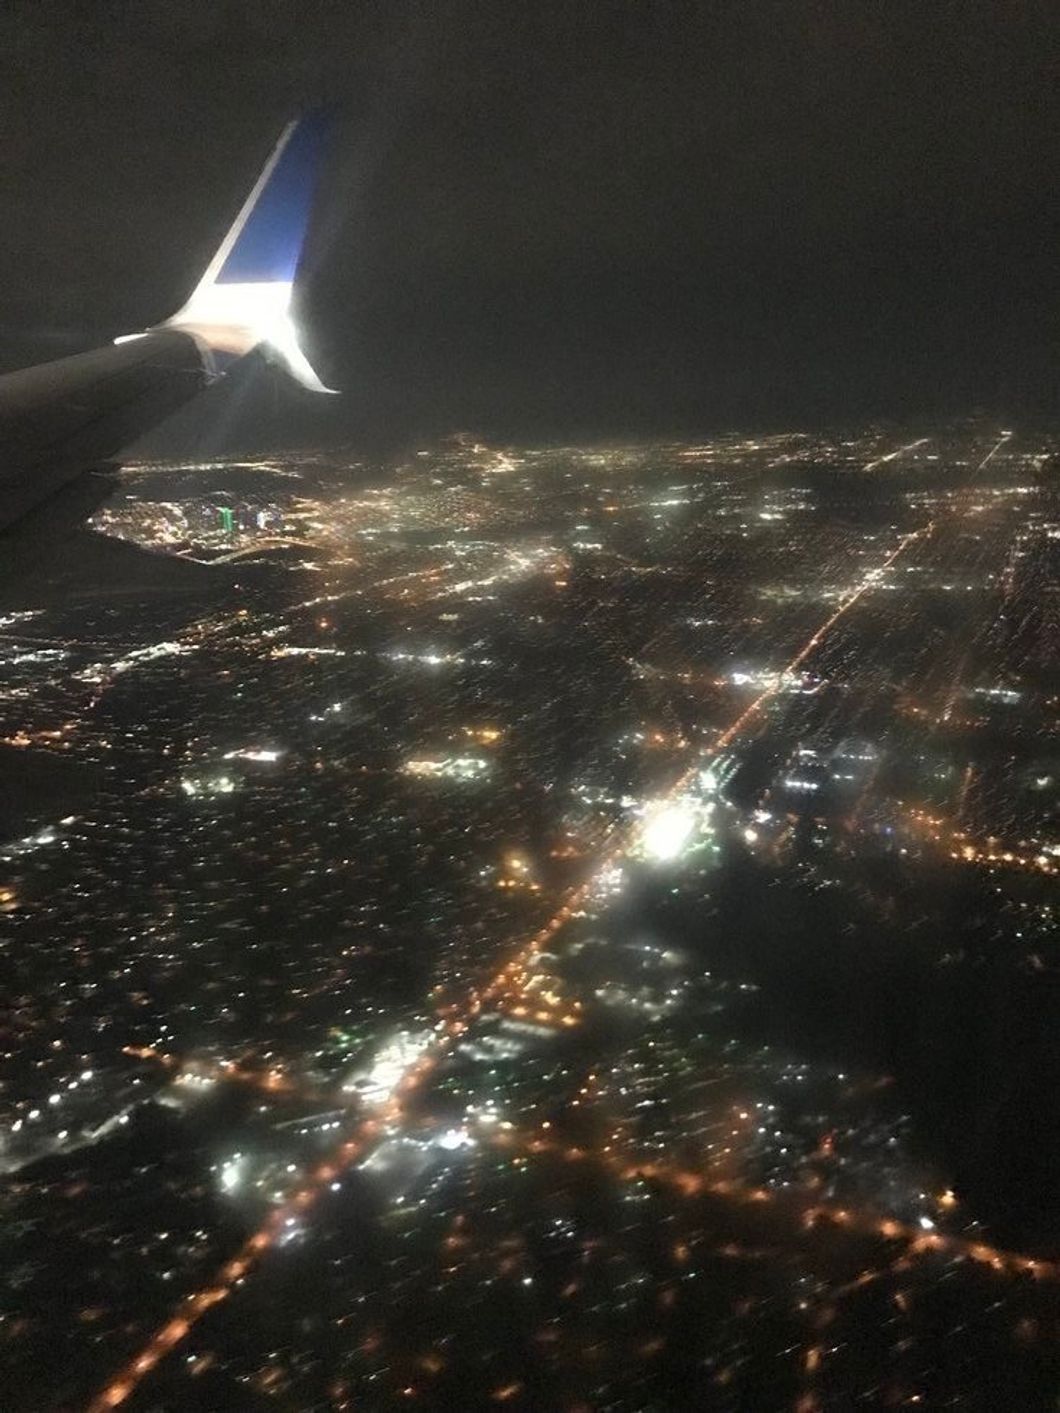 city lights from a plane